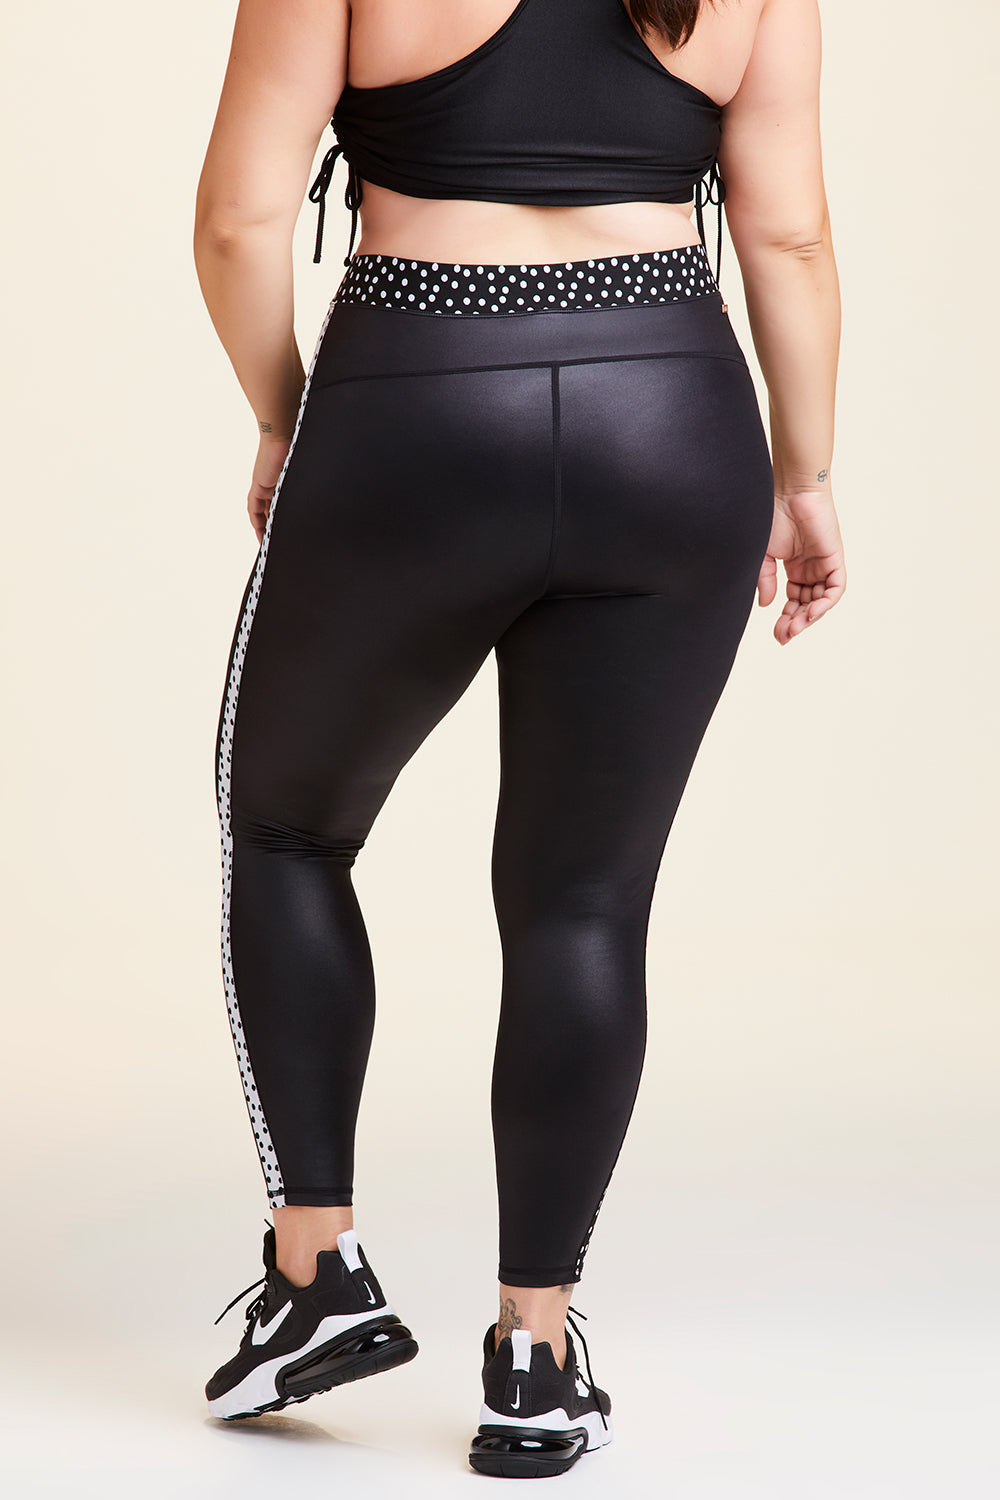 Back view of Alala Women's Luxury Athleisure shiny black tight with black and white polda dot detail on waistband and side seams in plus size